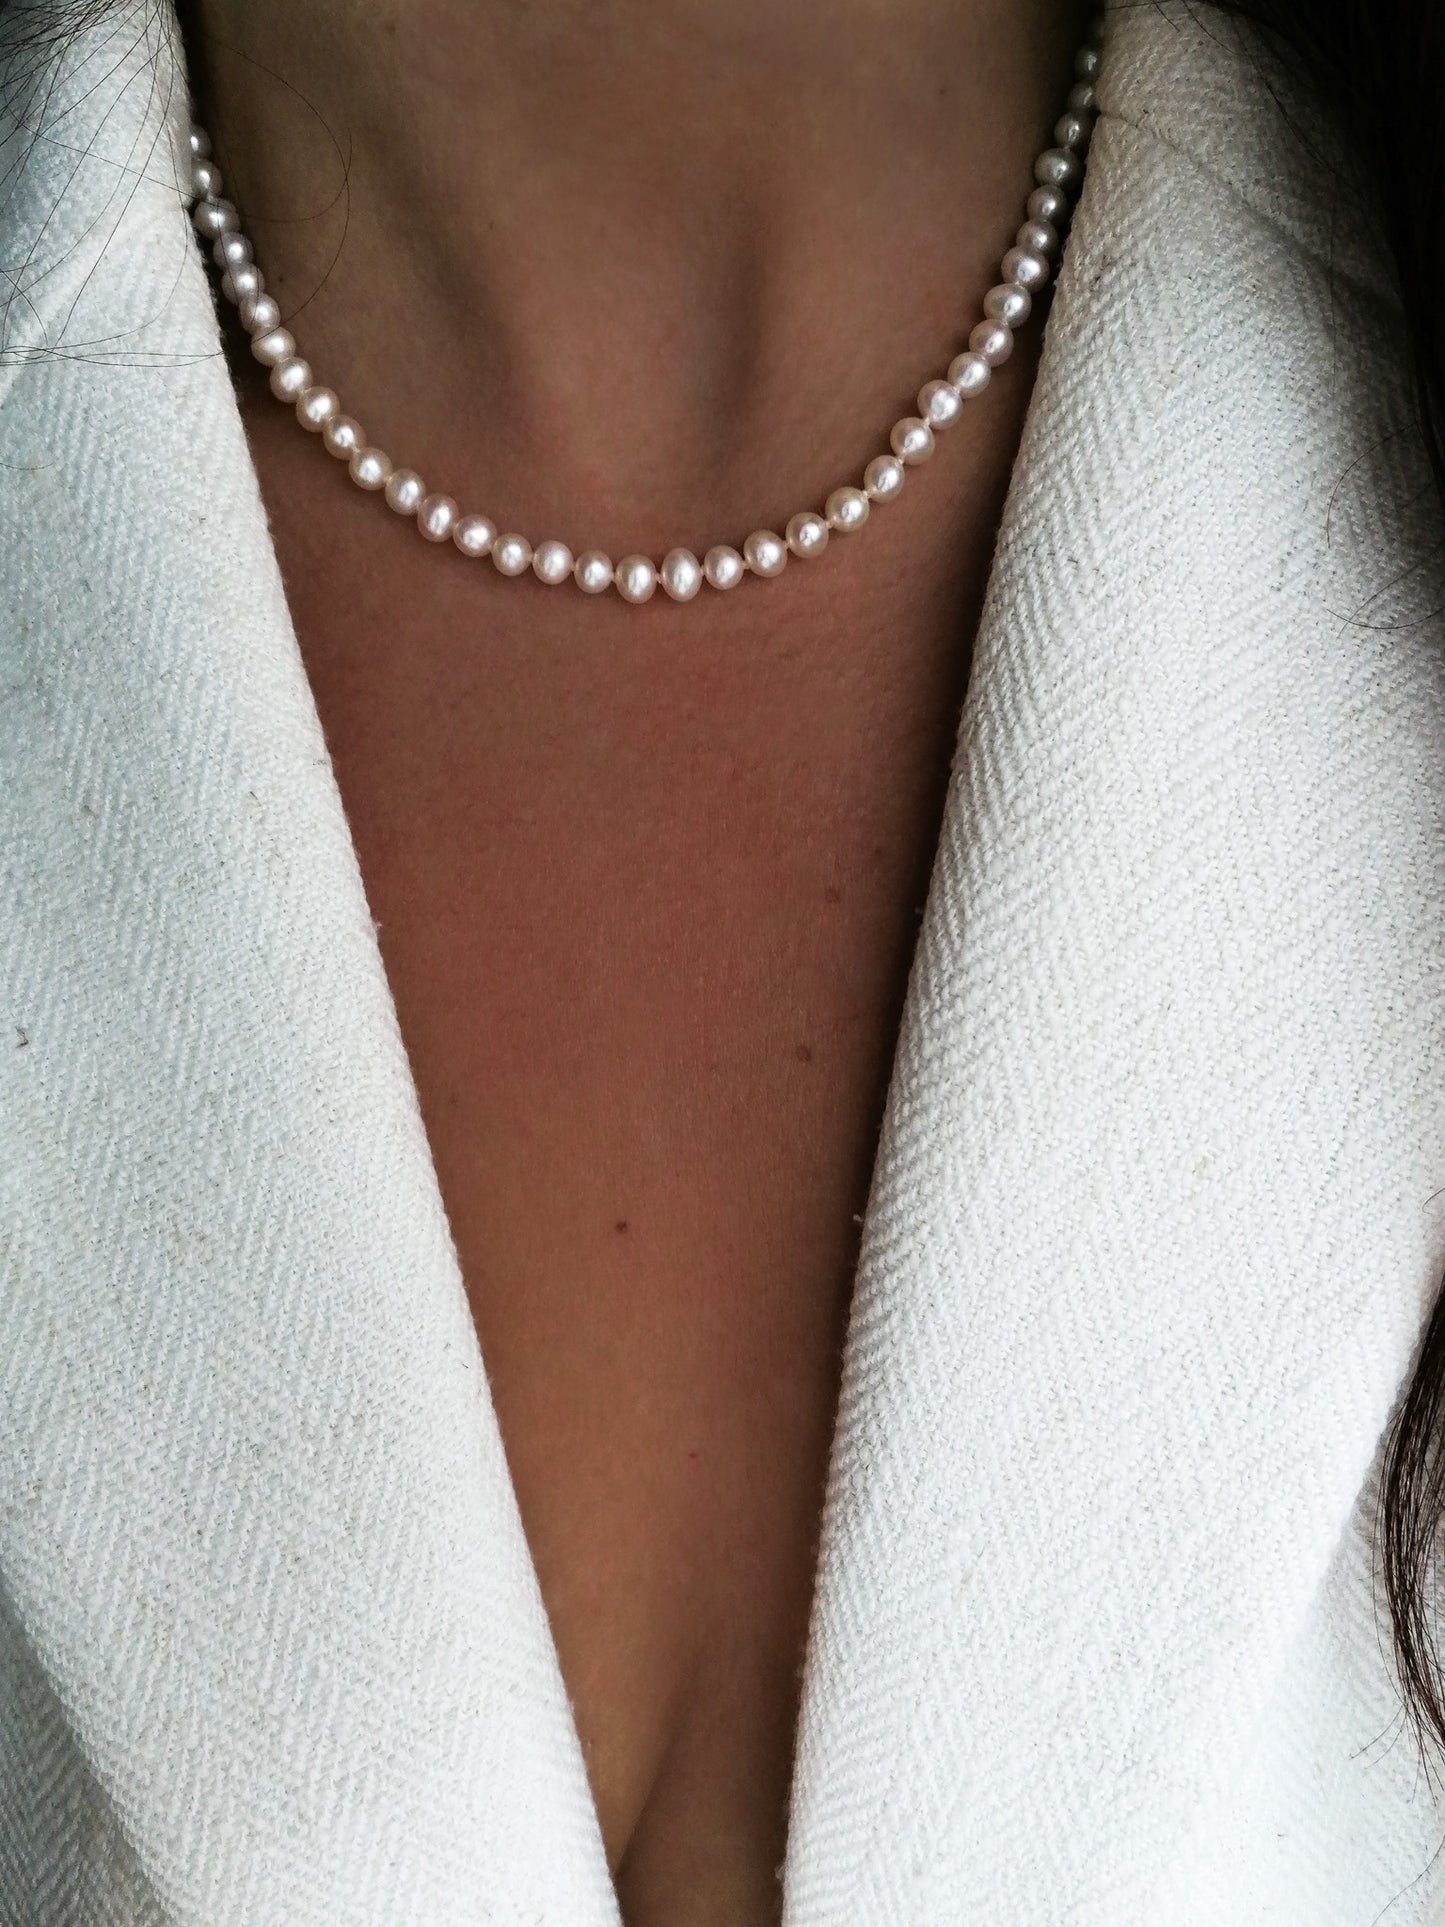 Classic pearl necklace - gold filled